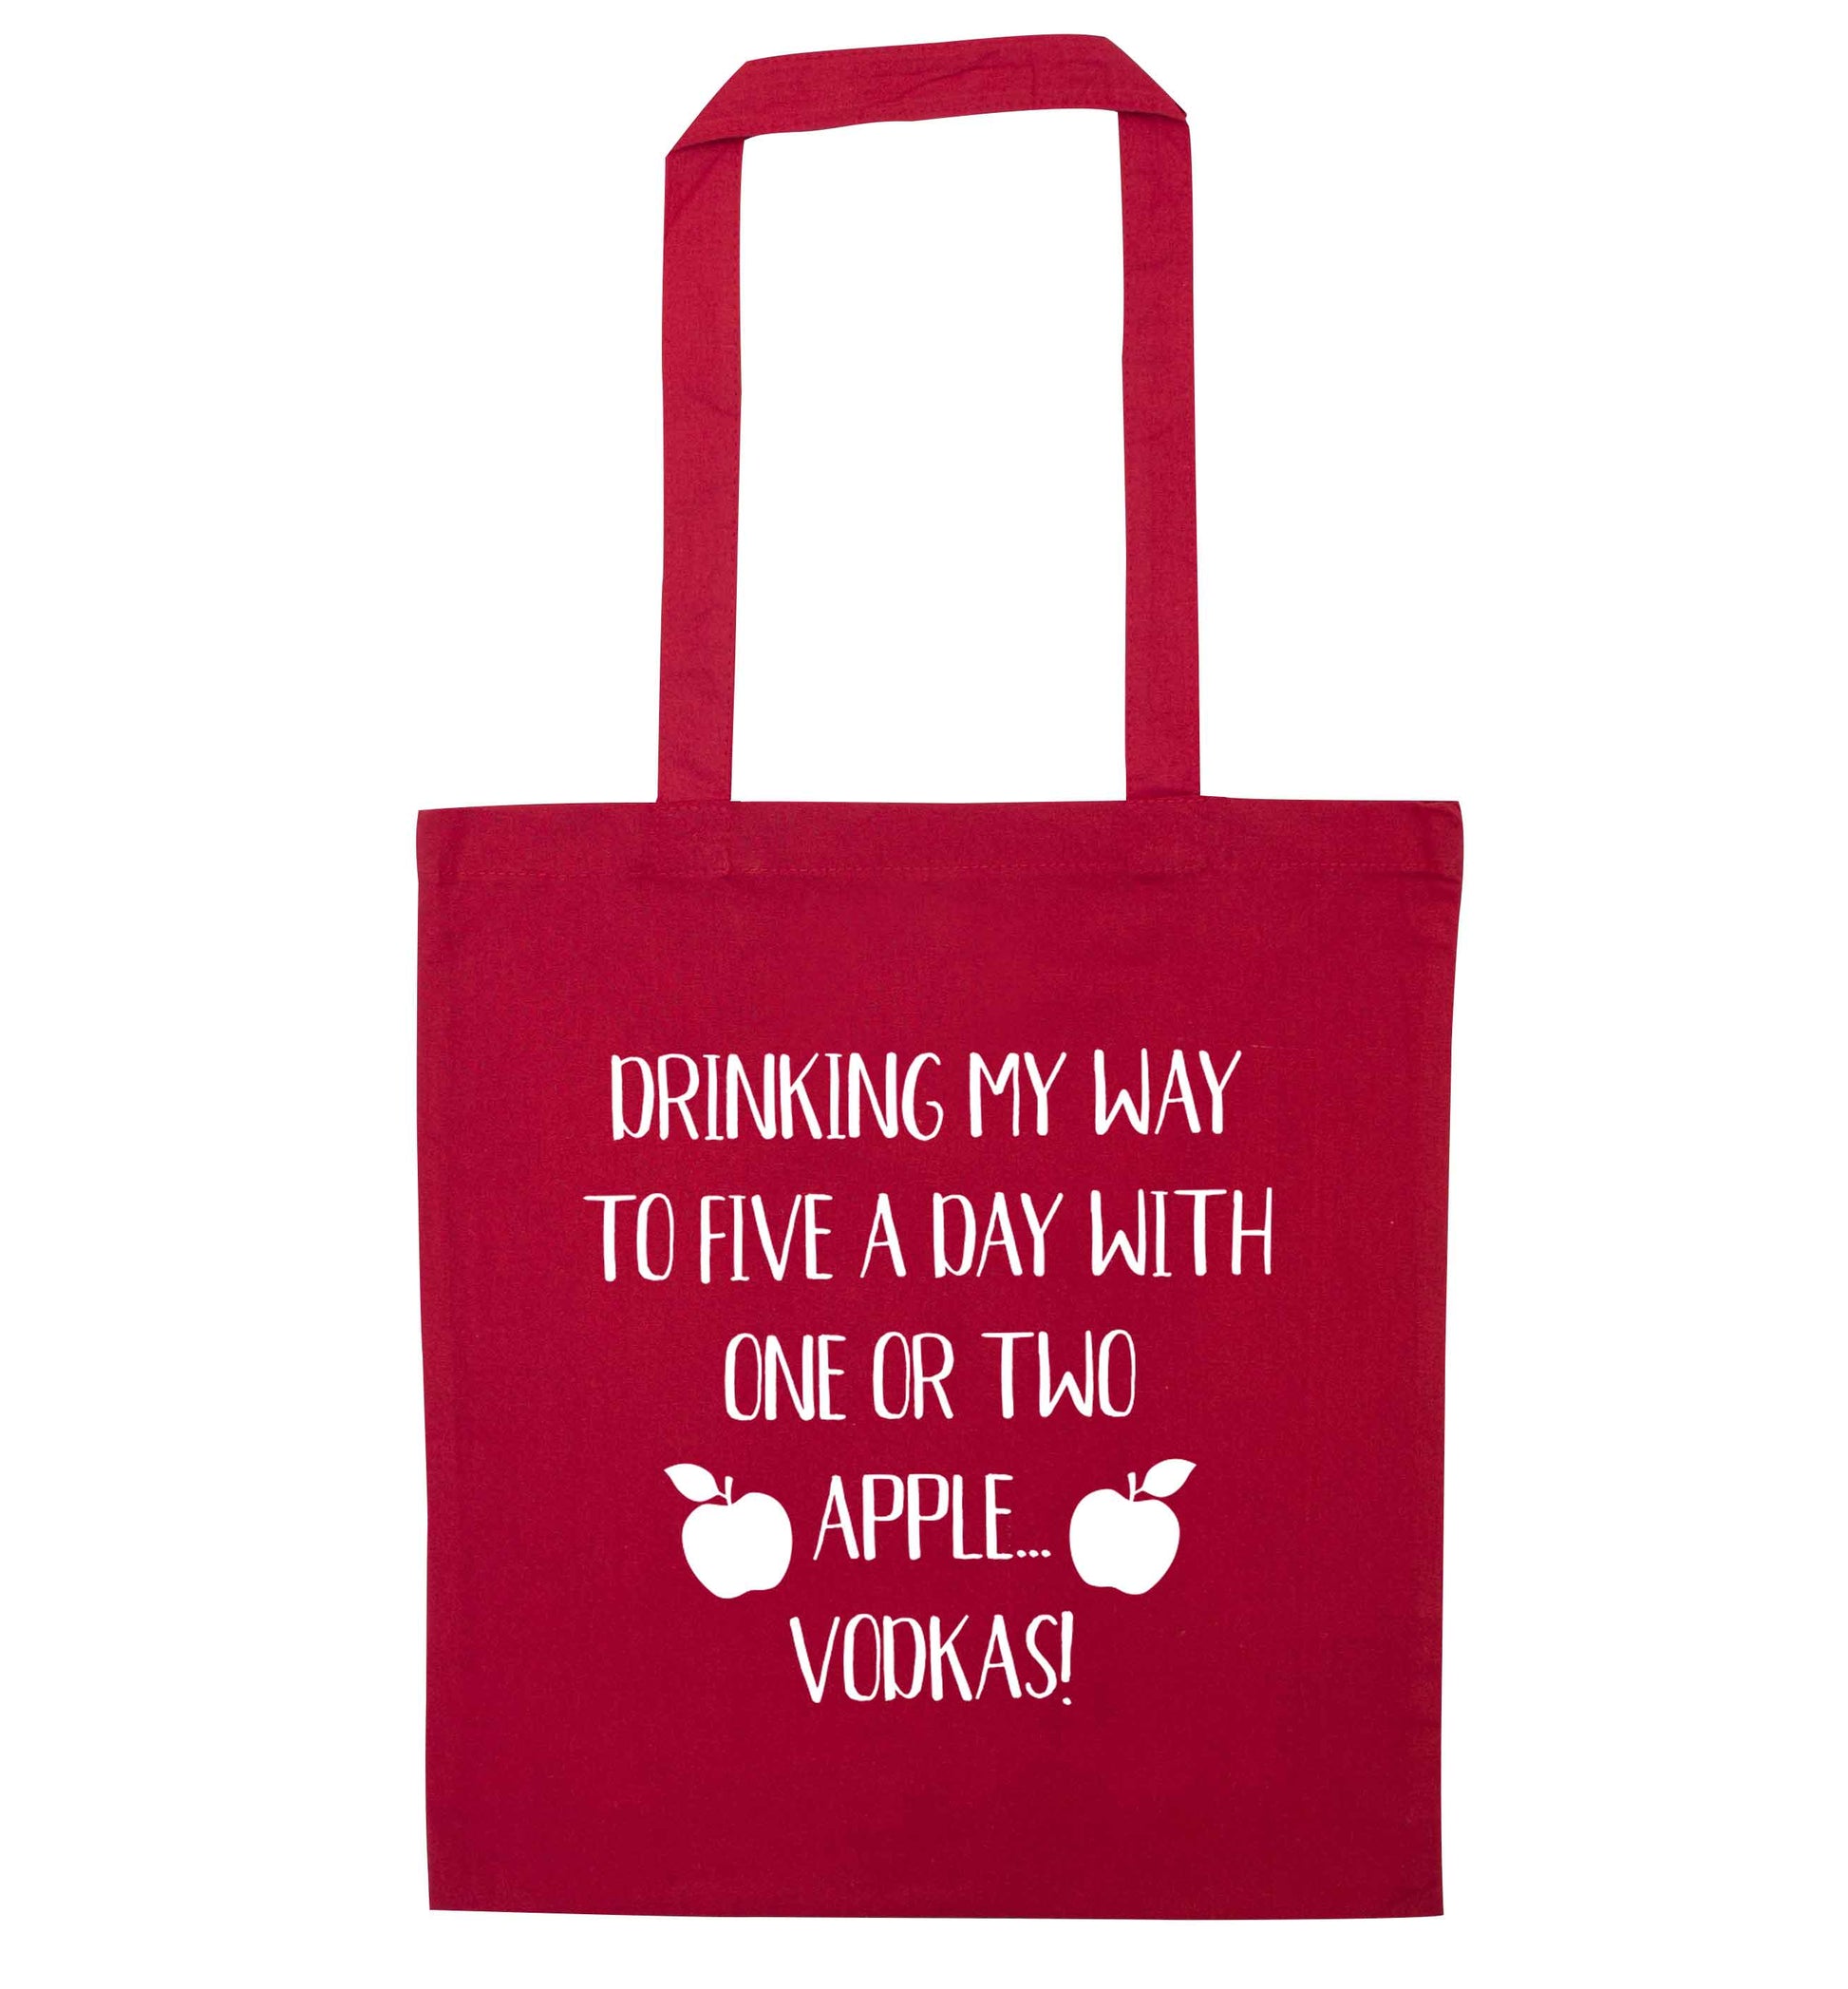 Drinking my way to five a day with one or two apple vodkas red tote bag